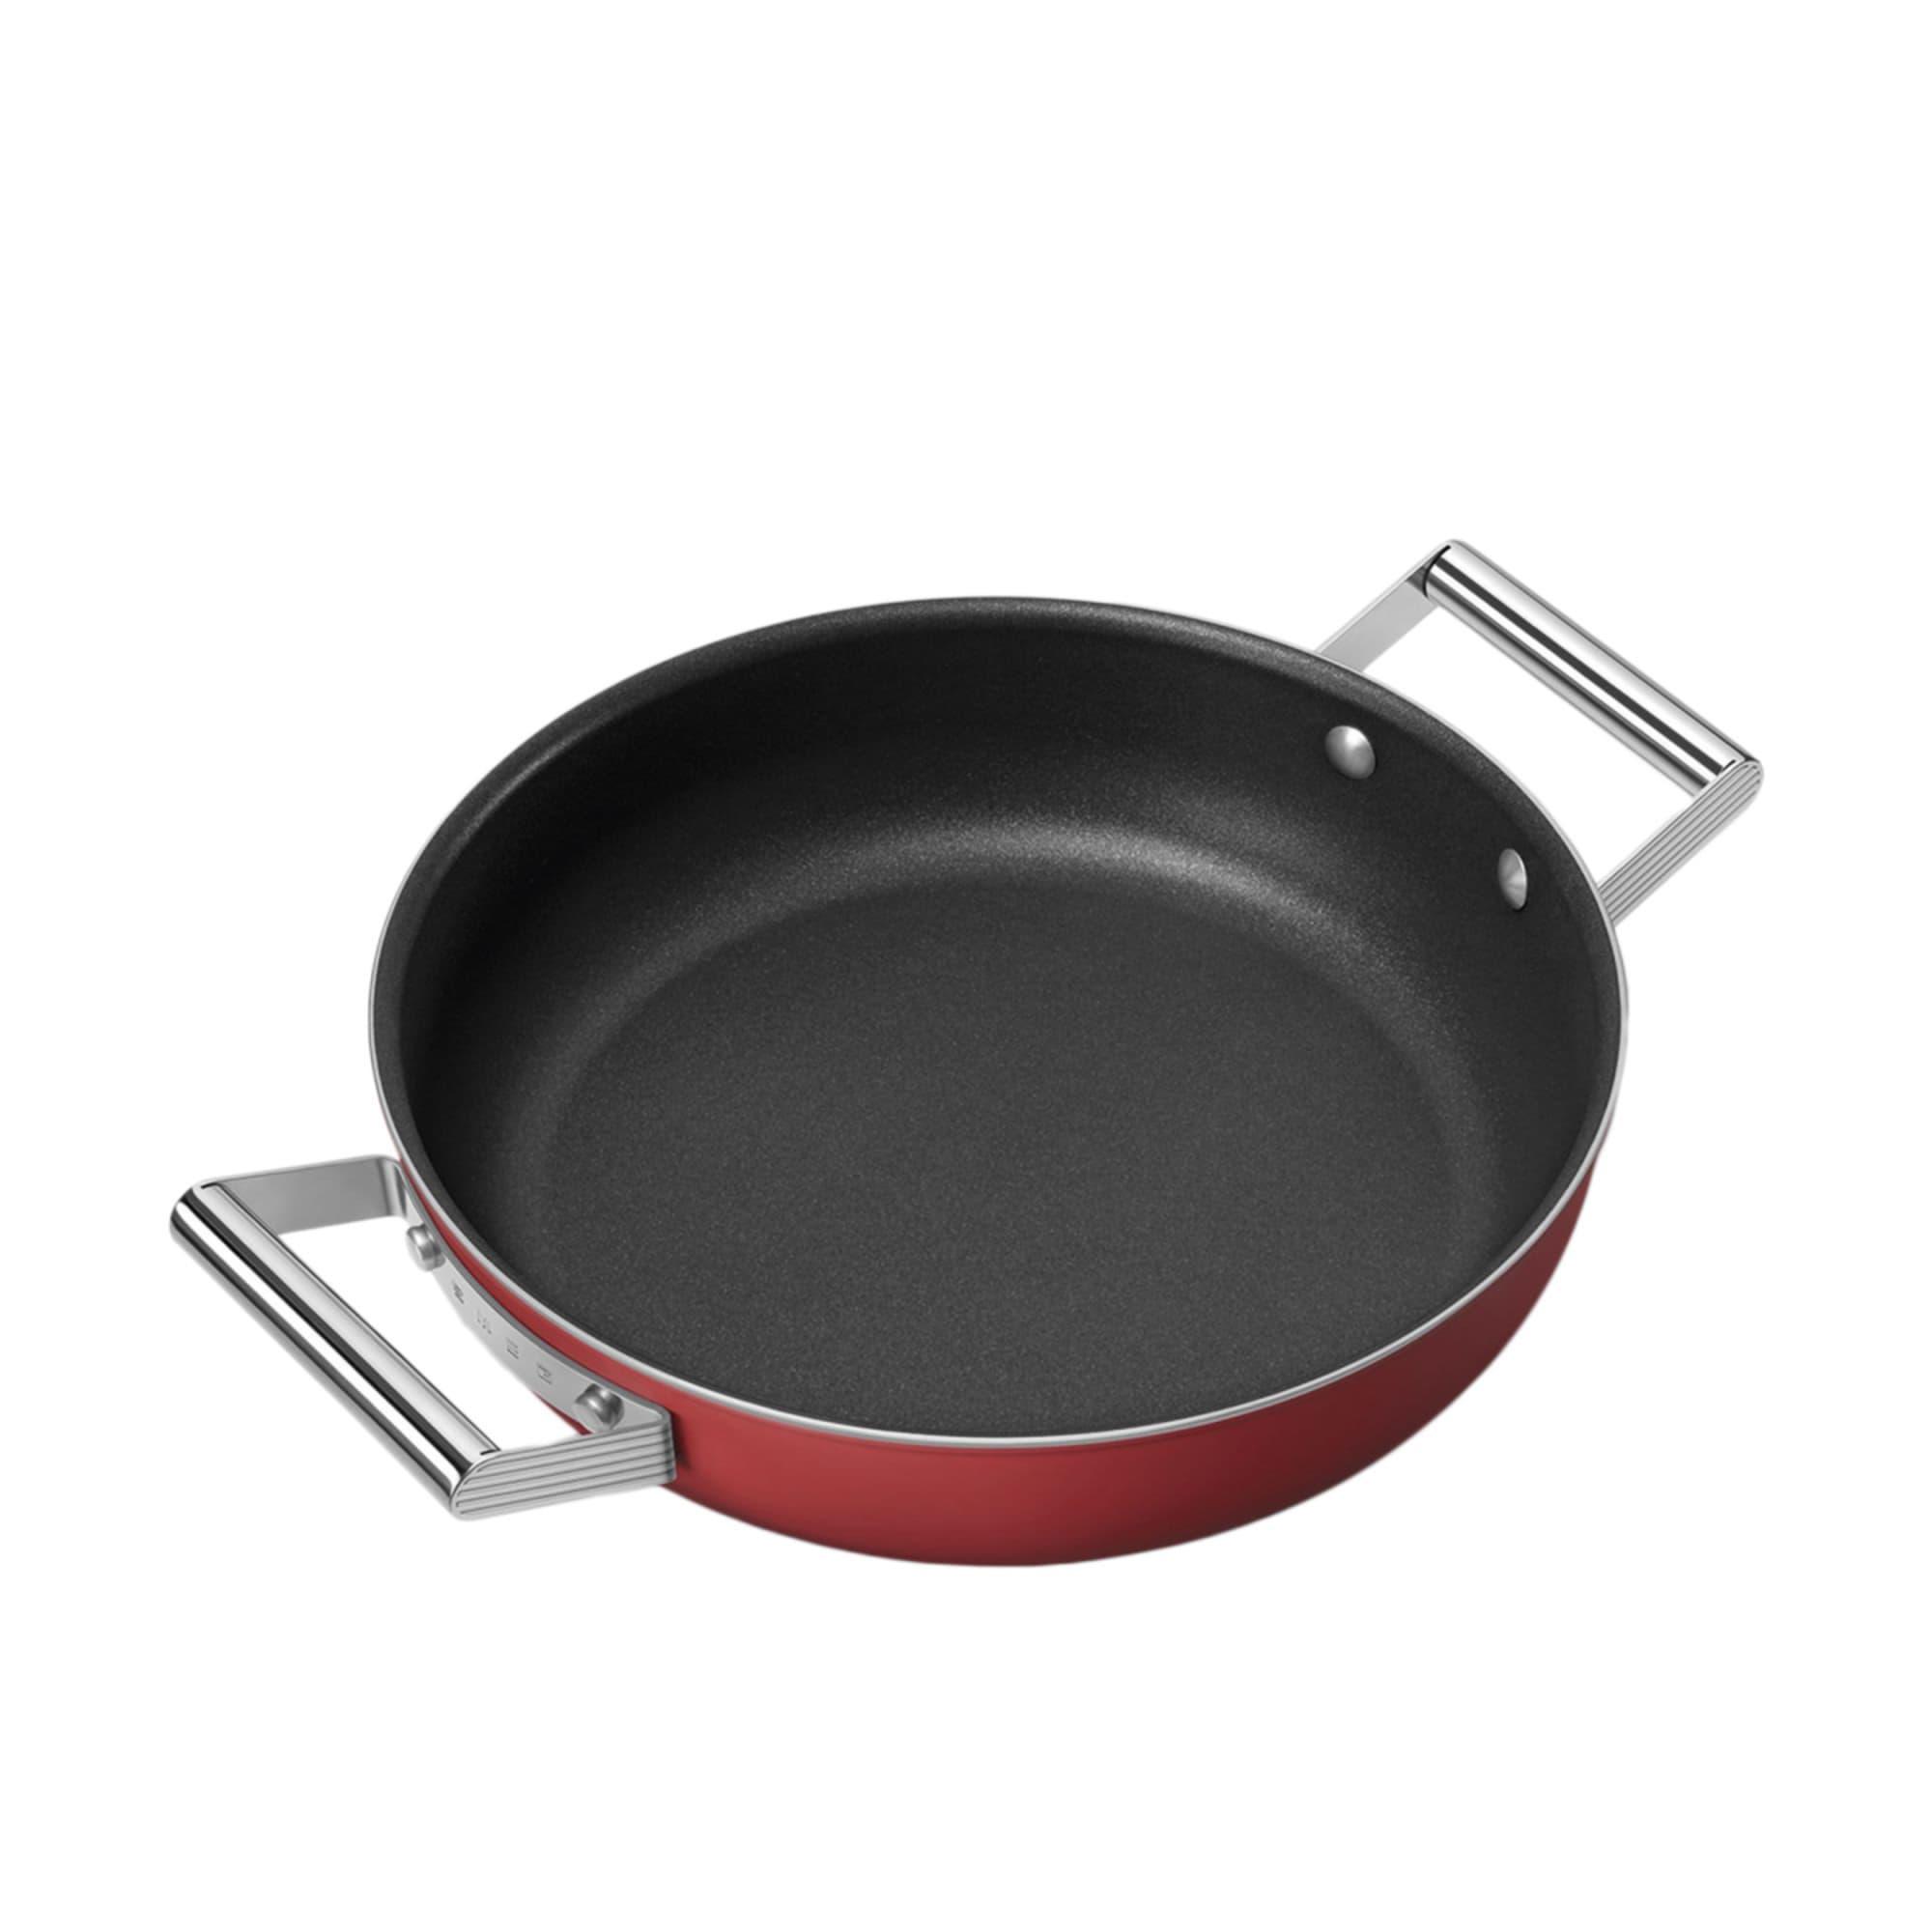 Smeg Non Stick Chef's Pan with Lid 28cm - 3.7L Red Image 8